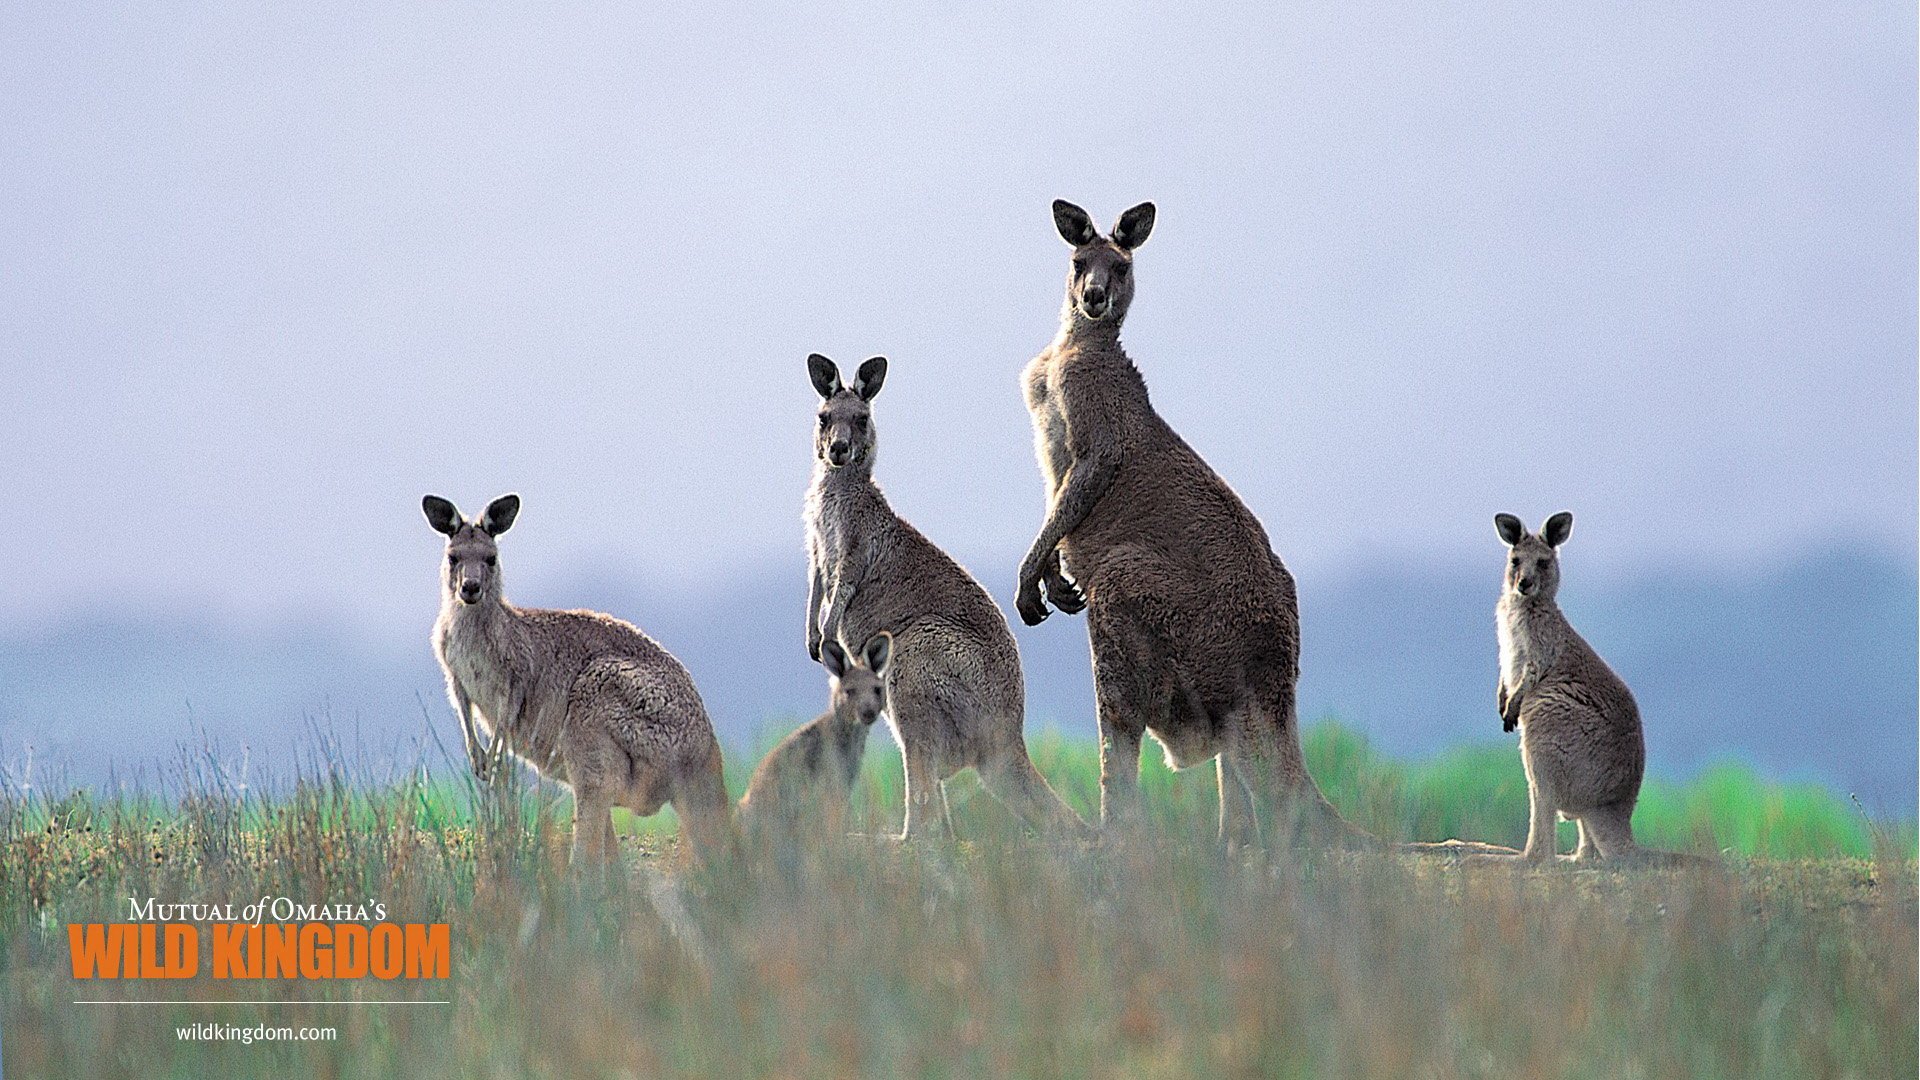 Free download Kangaroo Wallpapers HD Backgrounds Images Pics Photos Free  1920x1080 for your Desktop Mobile  Tablet  Explore 31 Kangaroo  Wallpapers  Kangaroo Wallpaper Captain Kangaroo Wallpaper Bing Kangaroo  Wallpaper